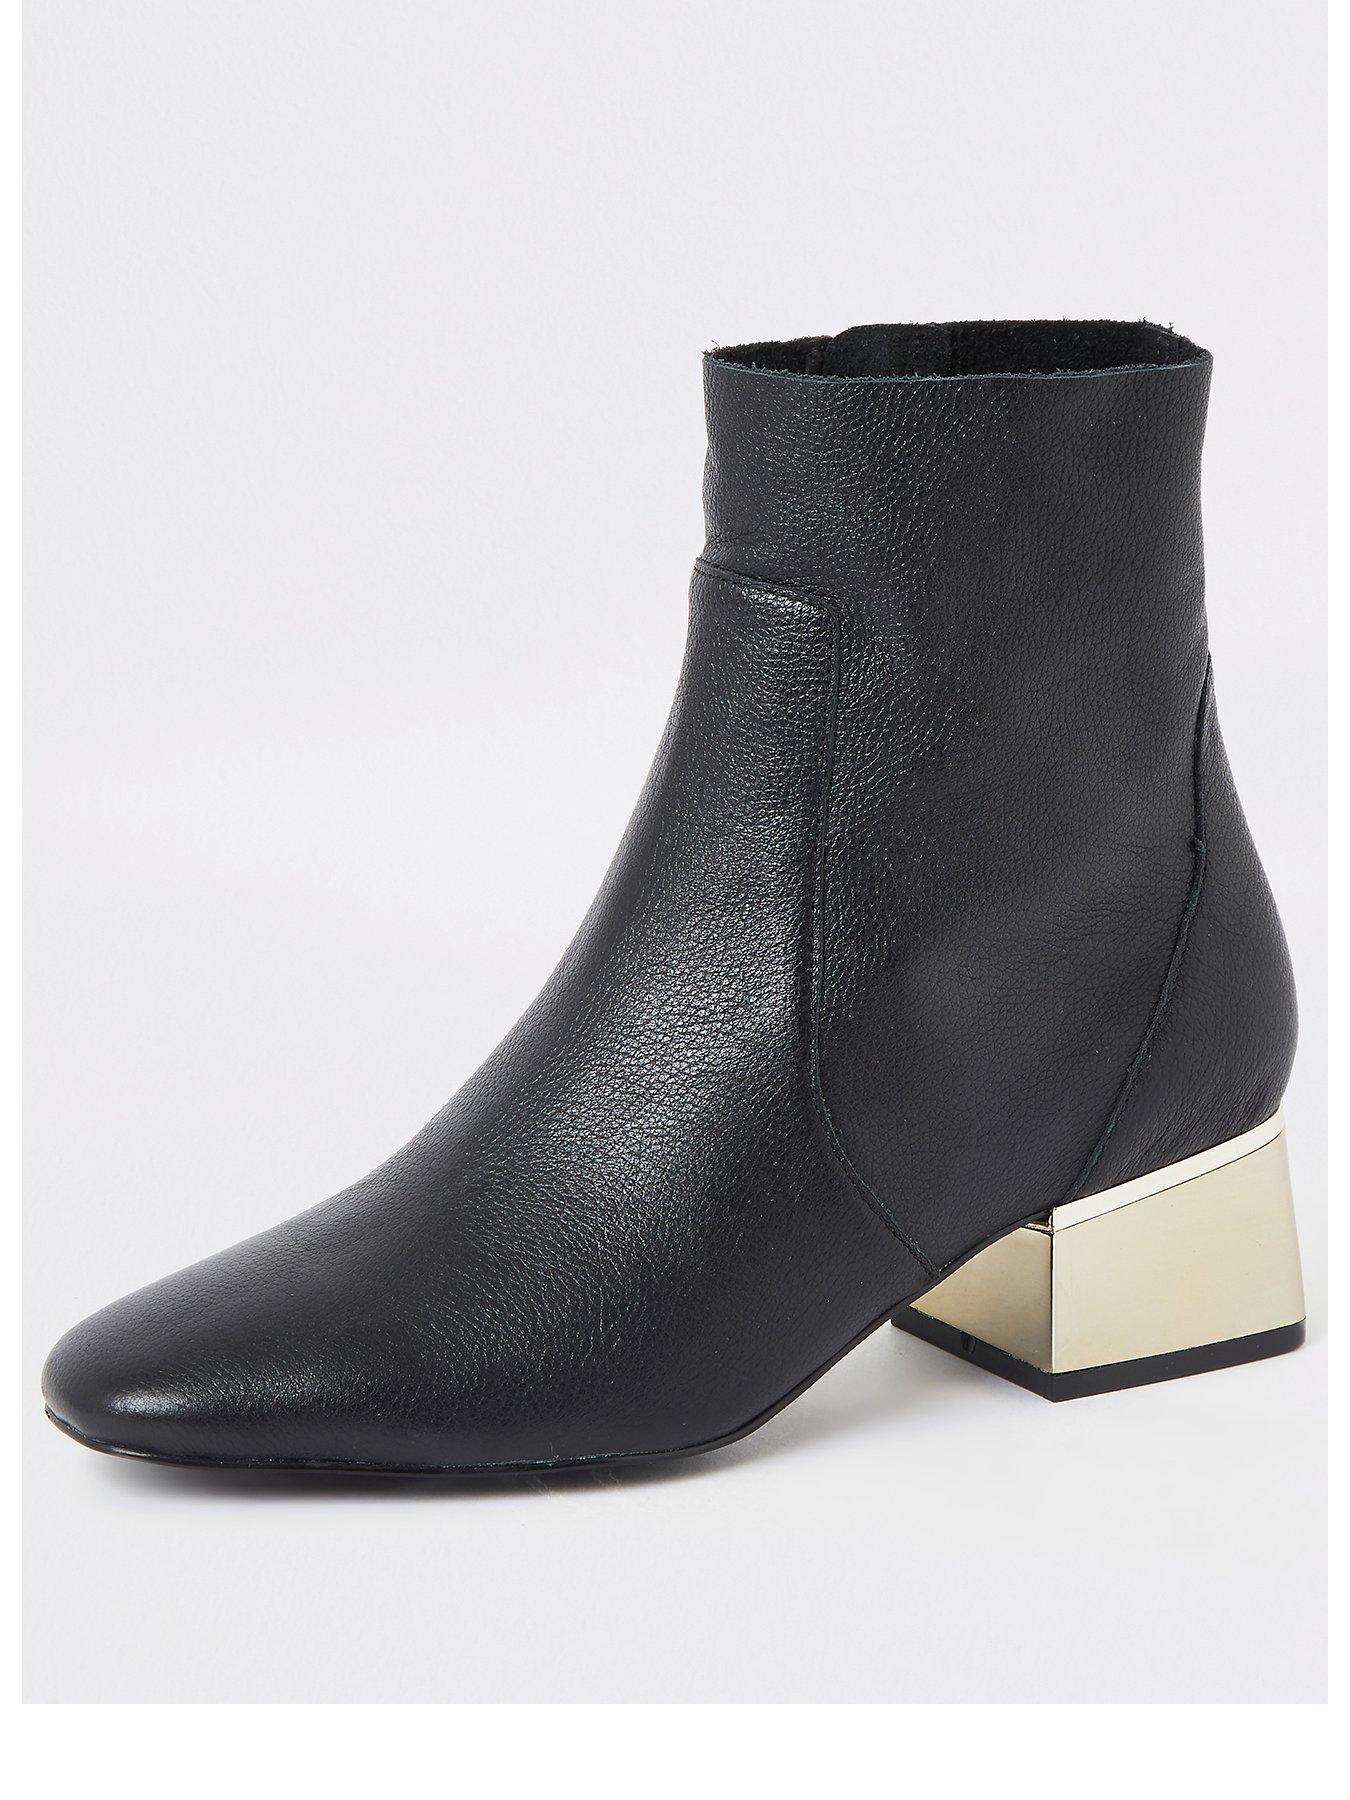 river island boots very